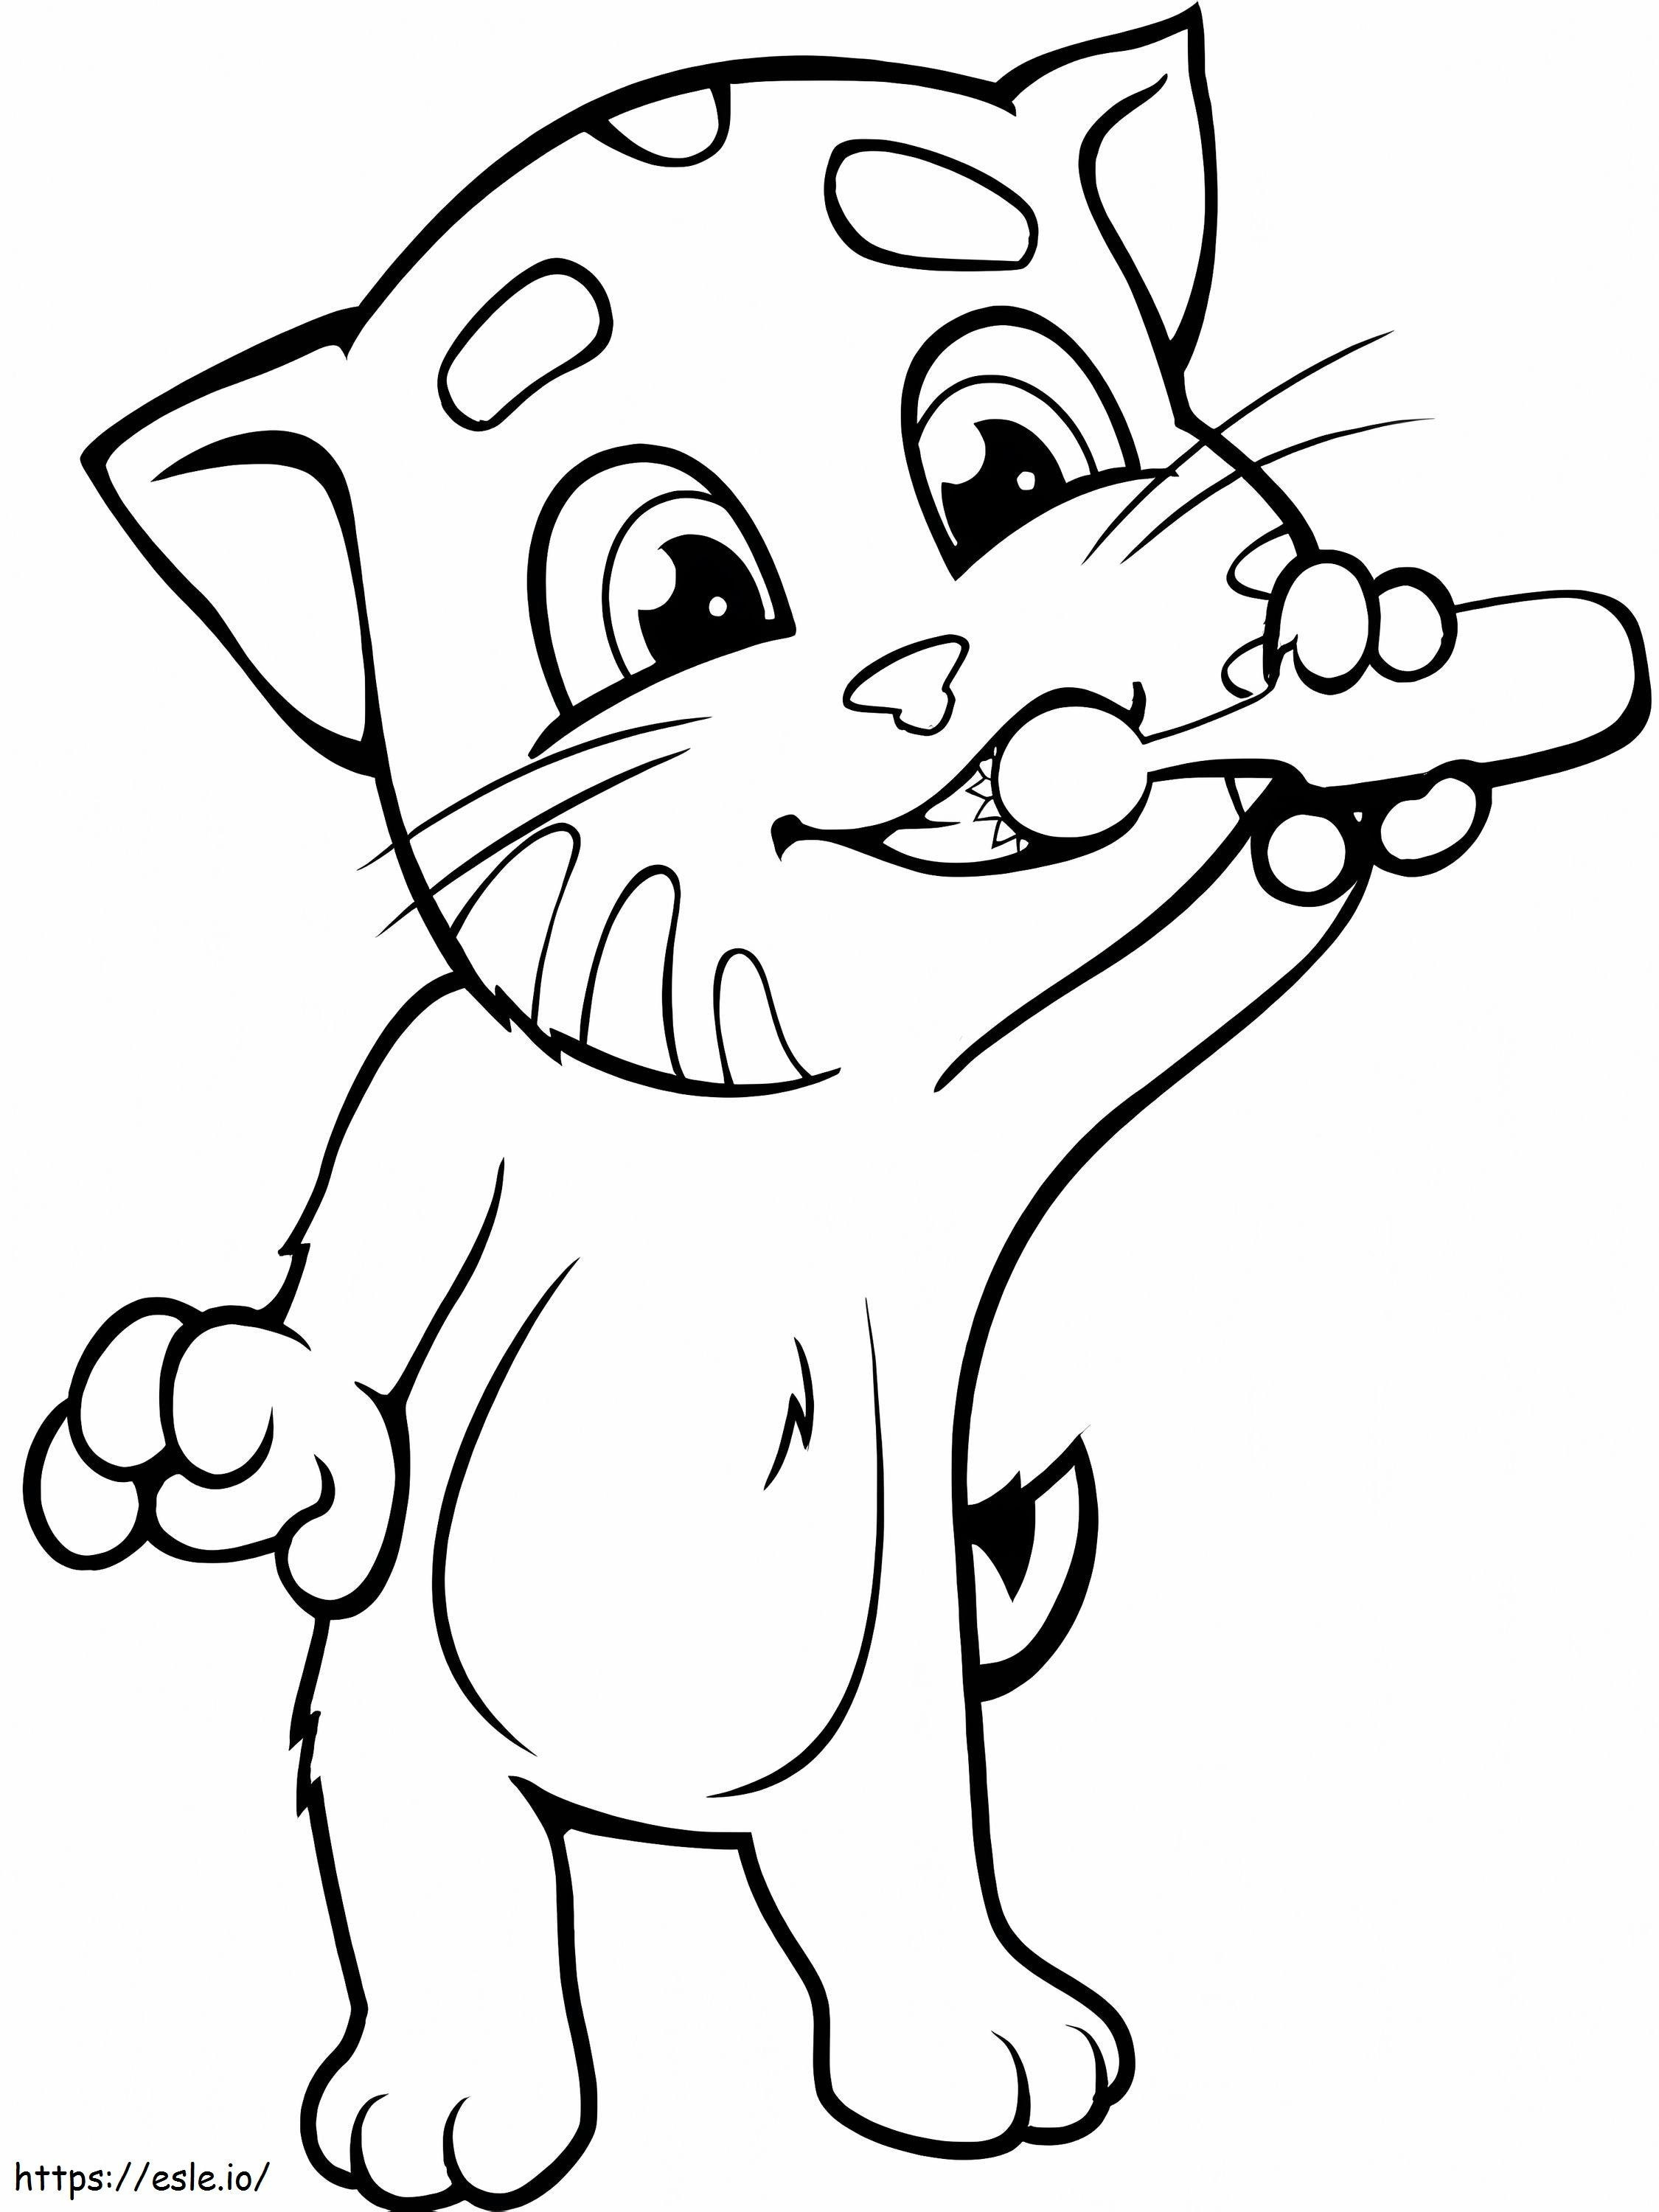 Brush Your Teeth With Tom coloring page